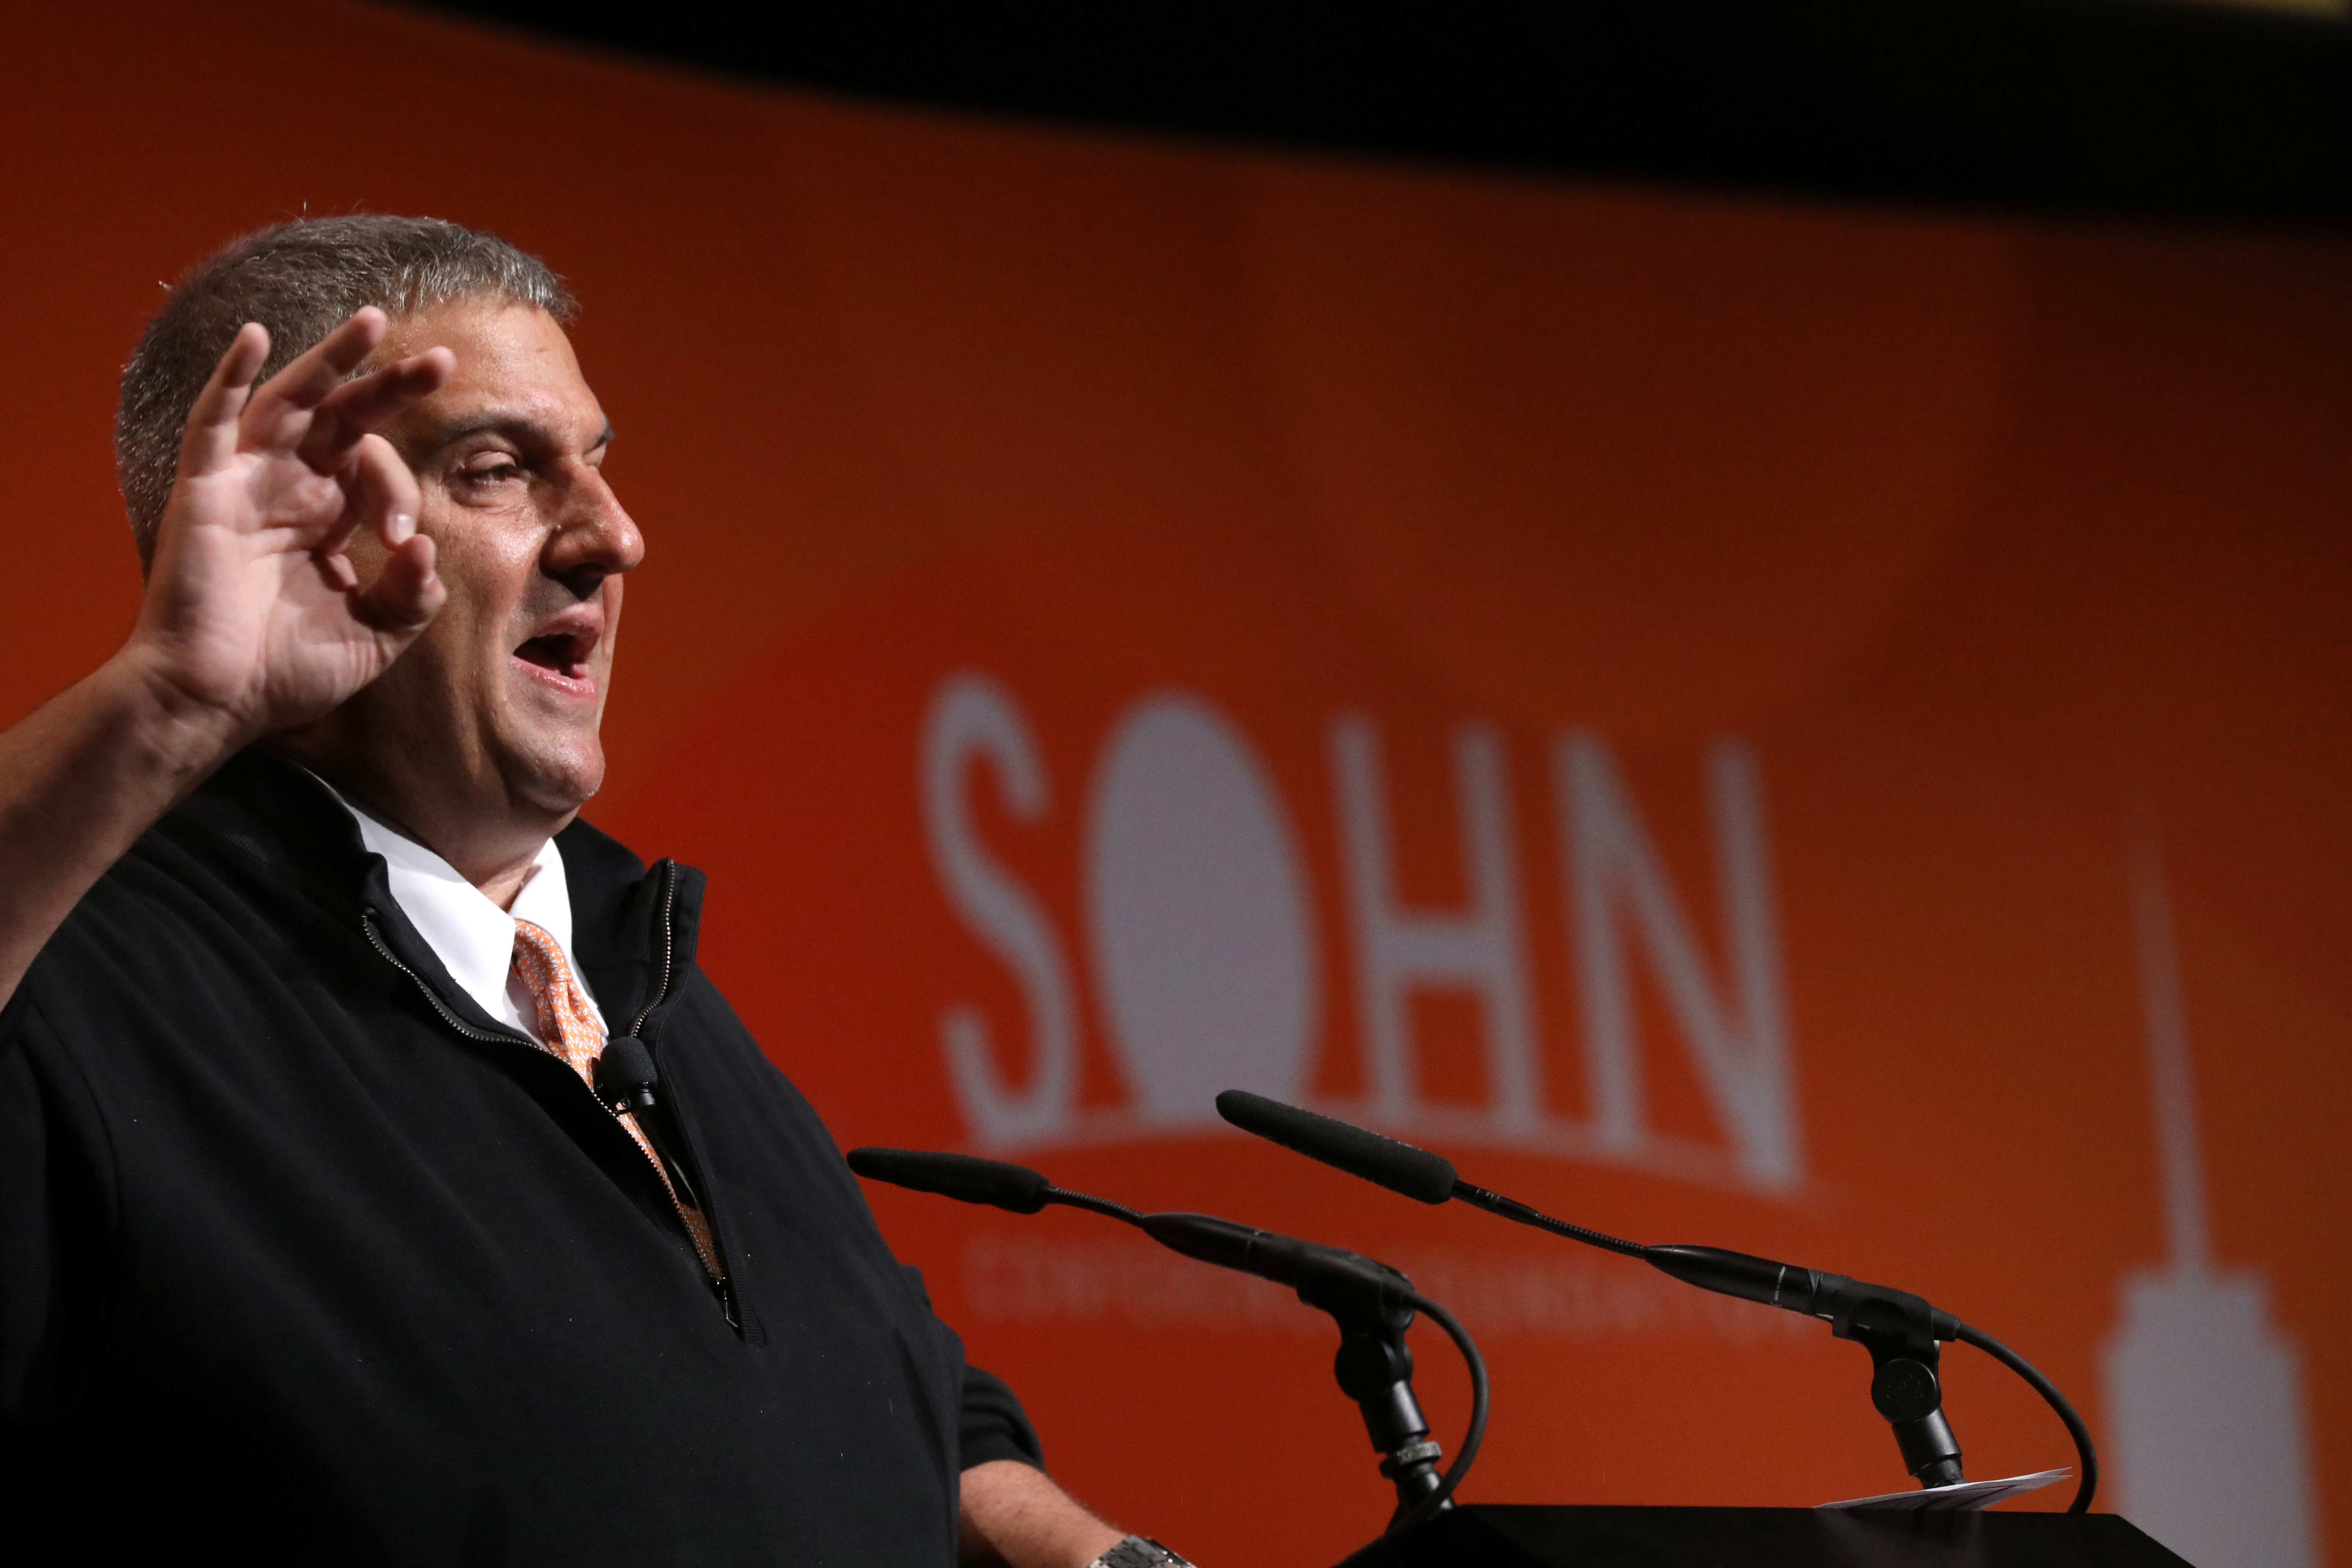 Larry Robbins, Founder of Glenview Capital Management, LLC speaks during the 2019 Sohn Investment Conference in New York